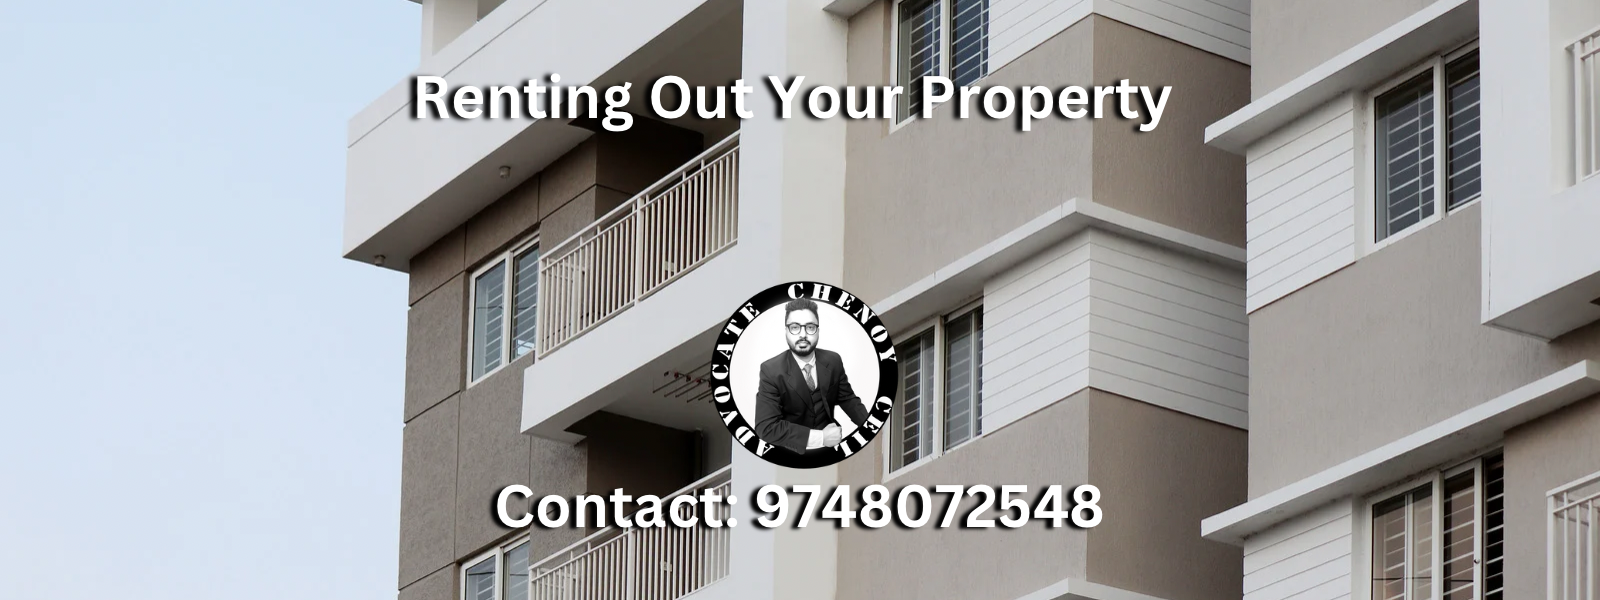 Renting out your Property